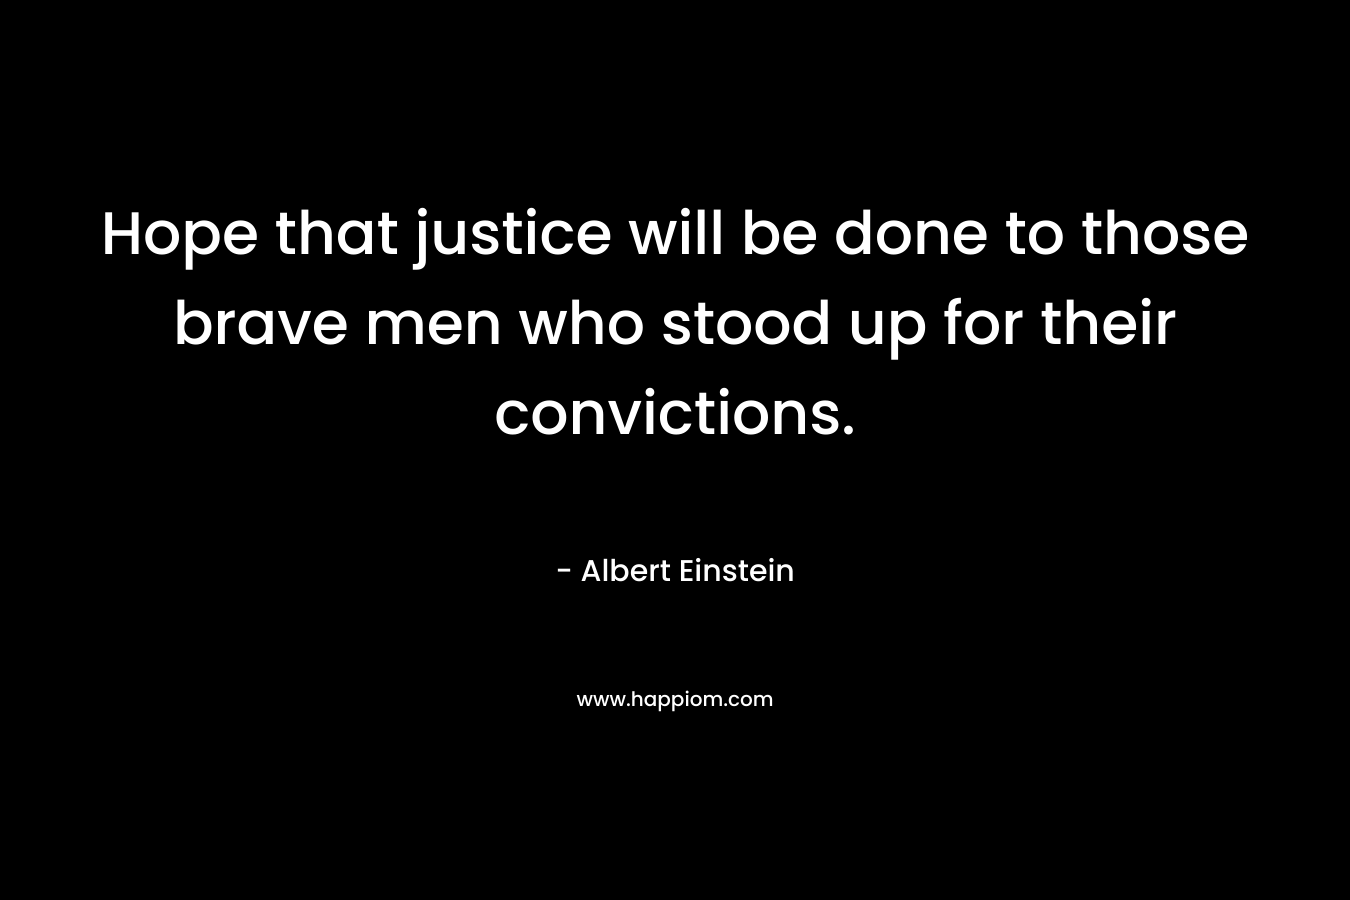 Hope that justice will be done to those brave men who stood up for their convictions. – Albert Einstein